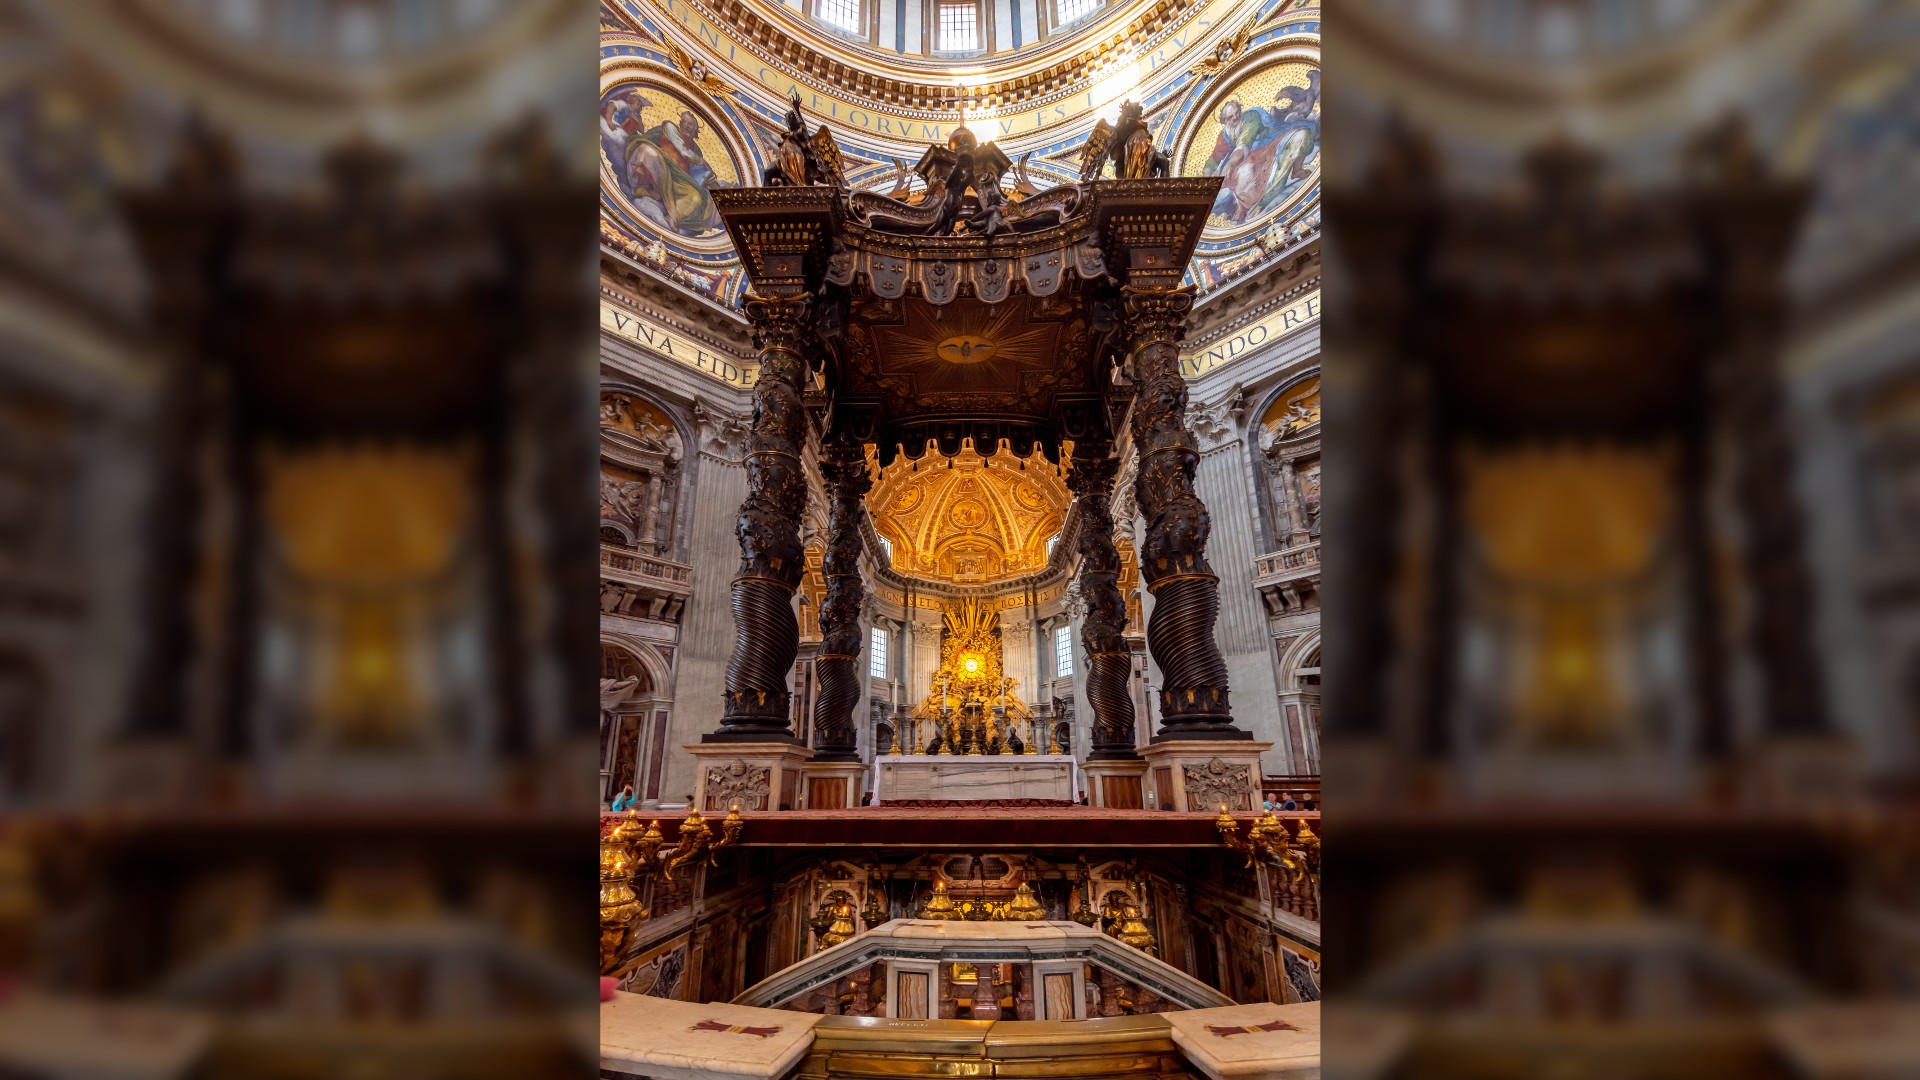 Baldachin over main altar with Saint Peter's tomb in St. Peter's basilica.